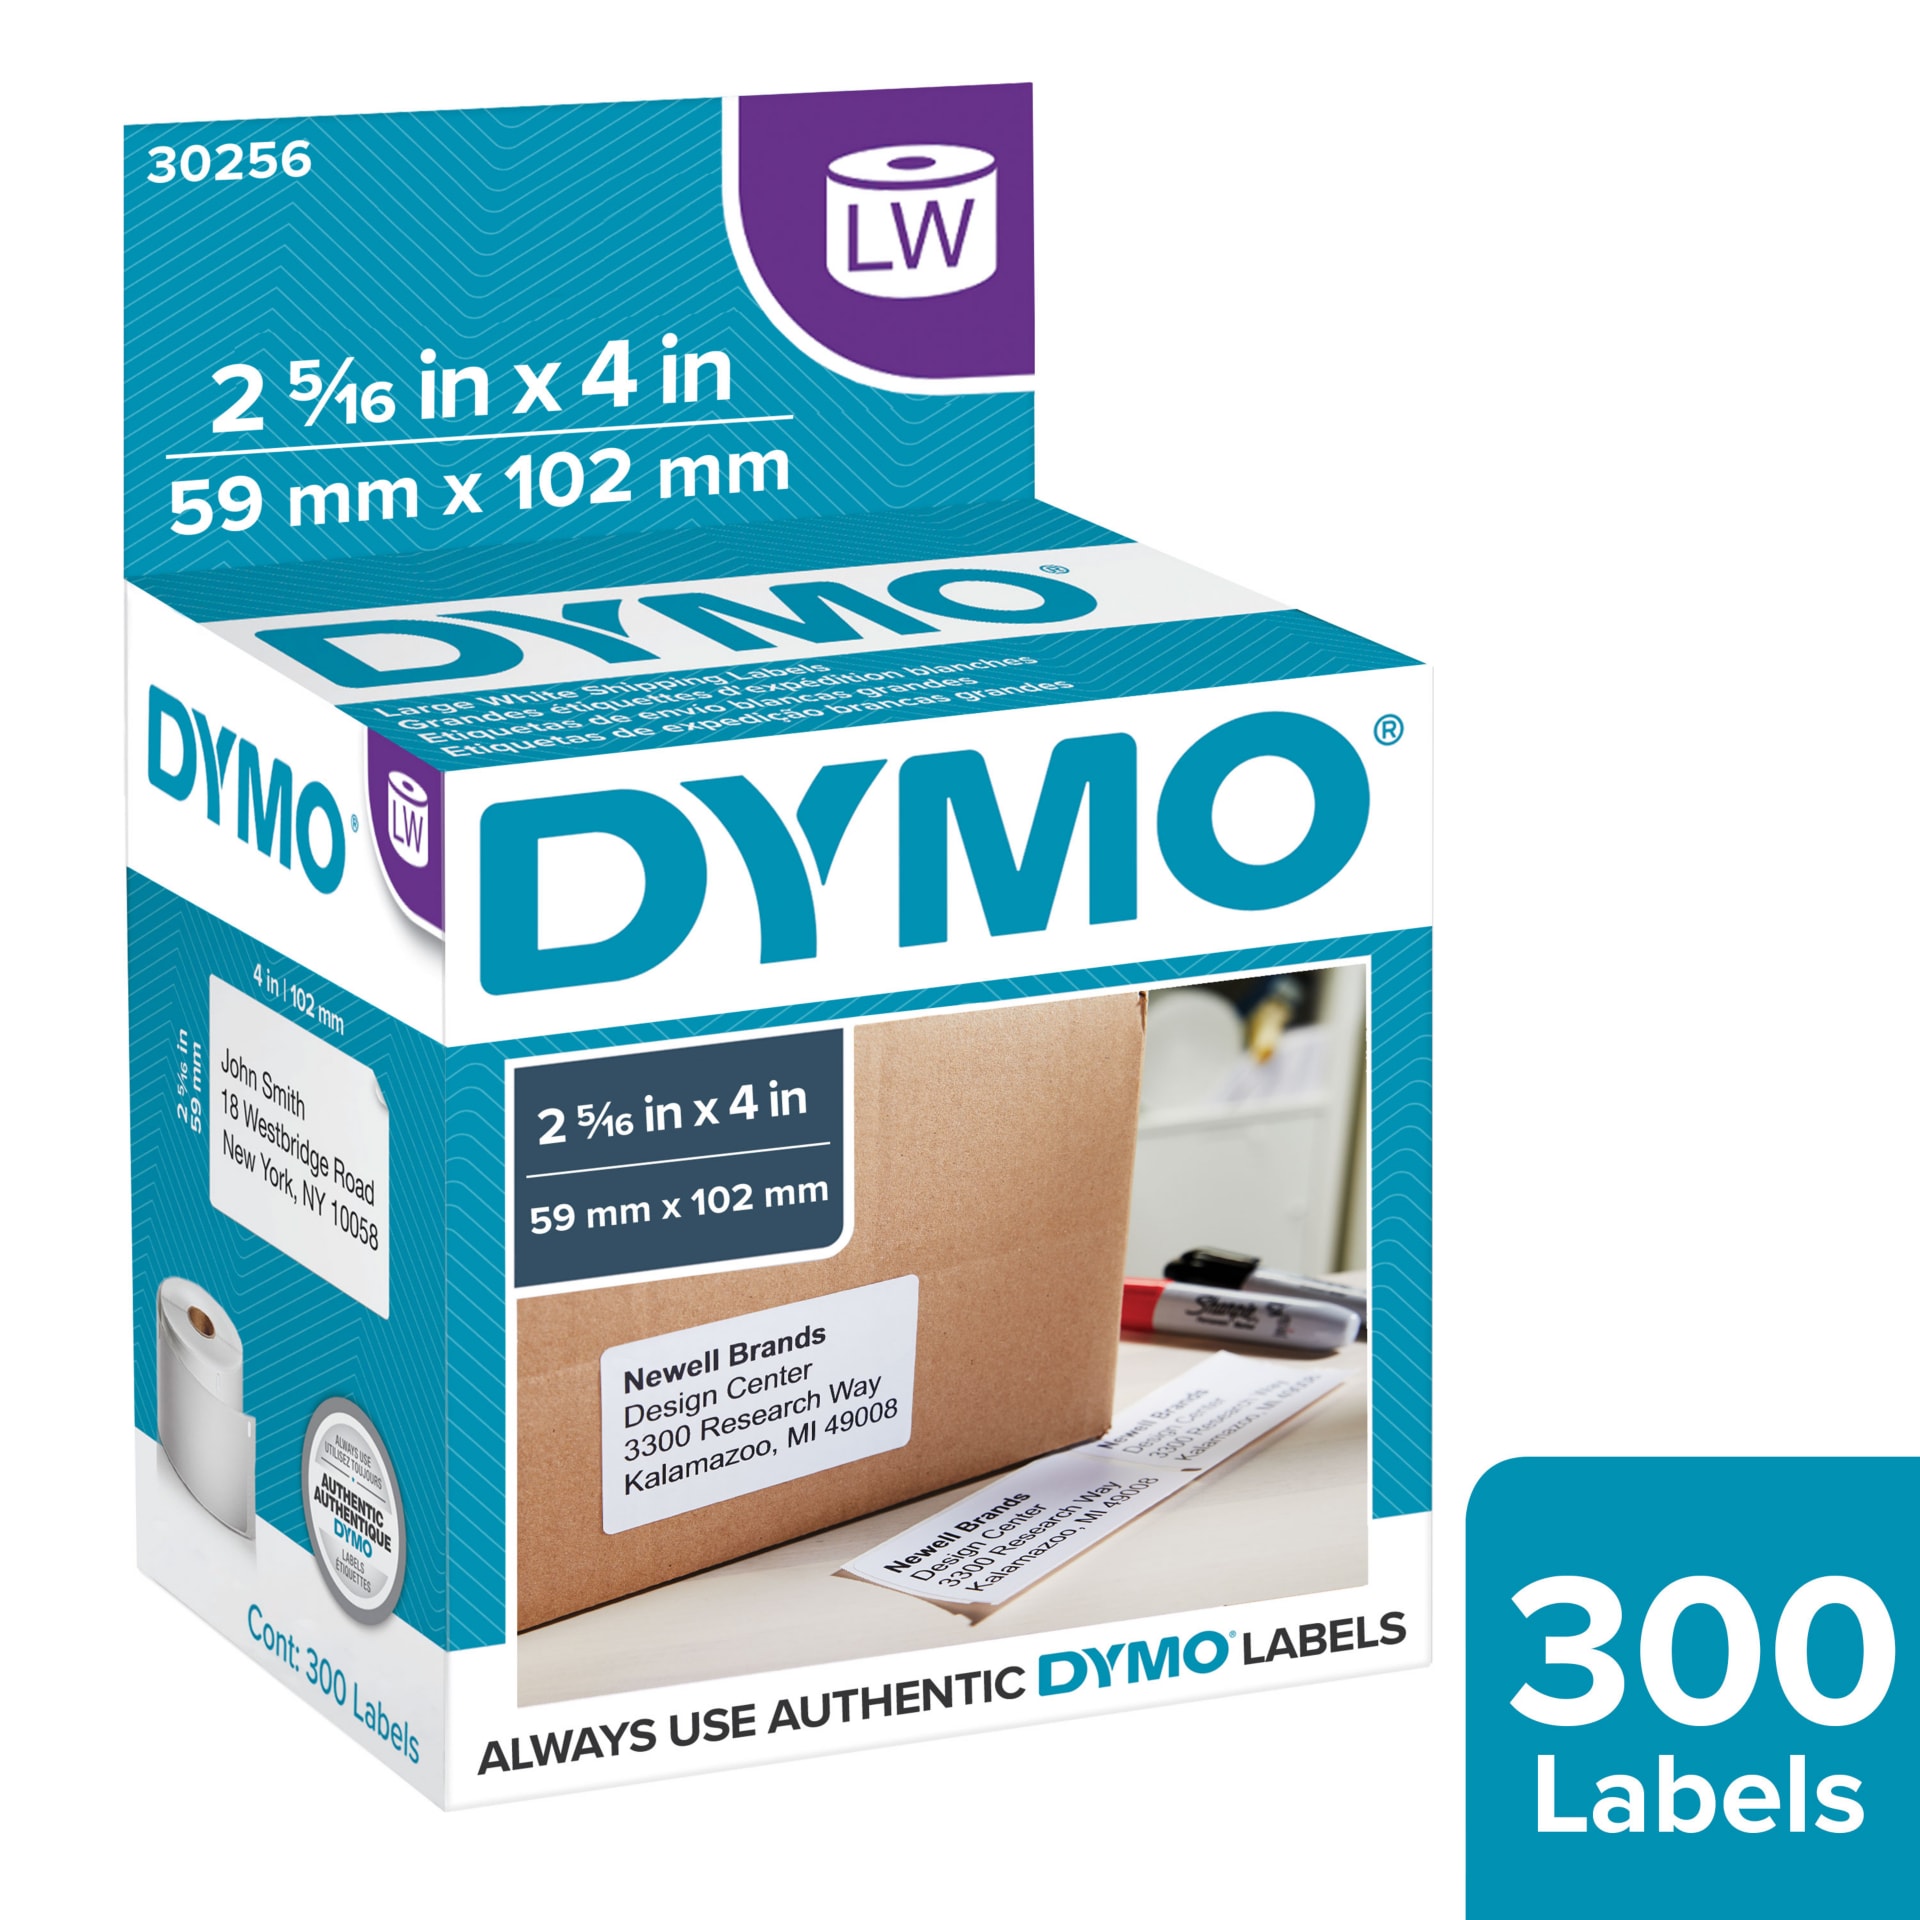 DYMO Authentic LW Large Shipping Labels (2-5/16” x 4”), 1 Roll